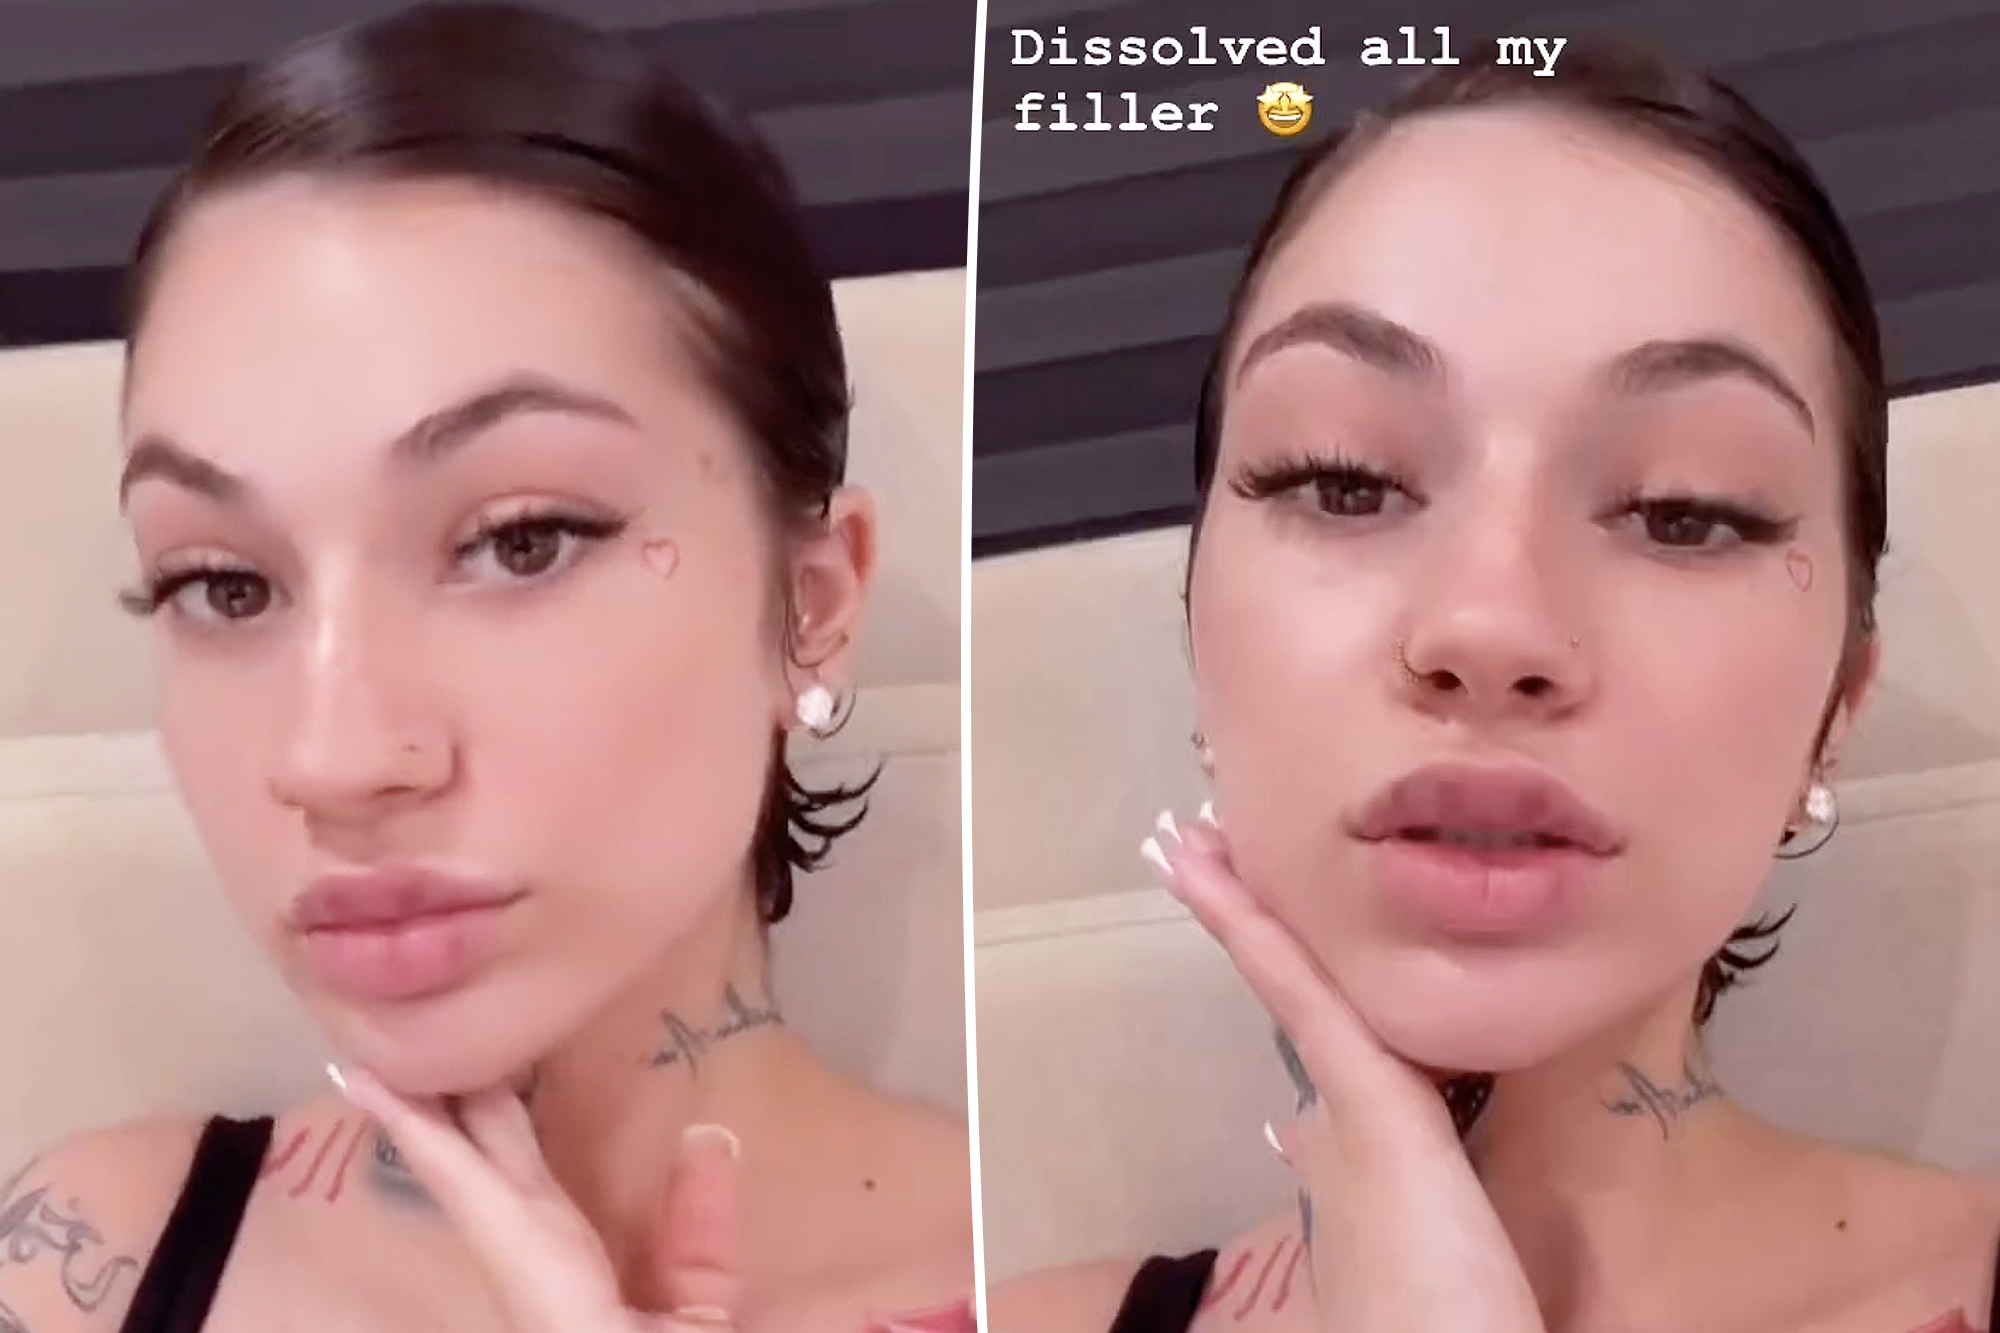 Bhad Bhabie dissolved her fillers, warns people to stop getting them